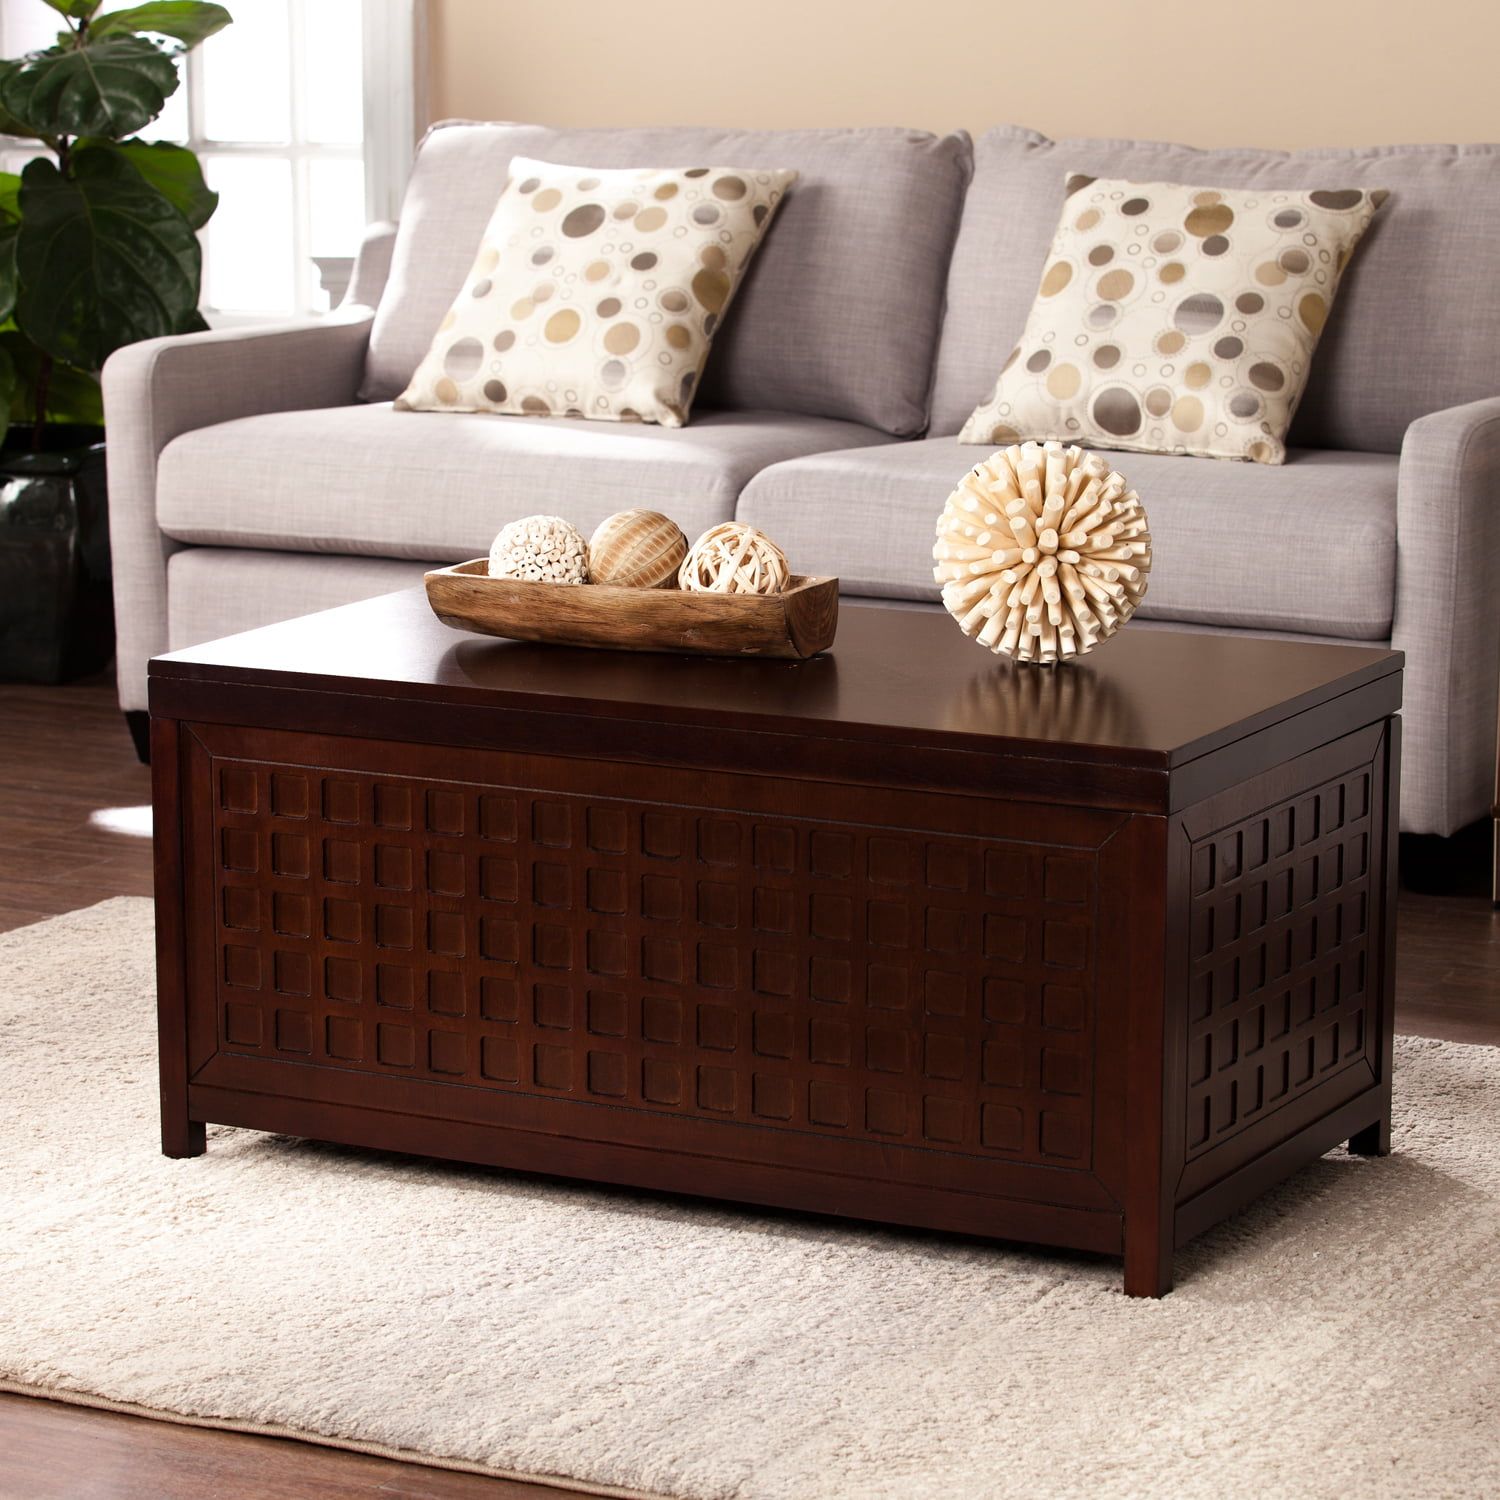 Southern Enterprises Alva Coffee Trunk Table, Espresso – Walmart Within Southern Enterprises Larksmill Coffee Tables (View 5 of 15)